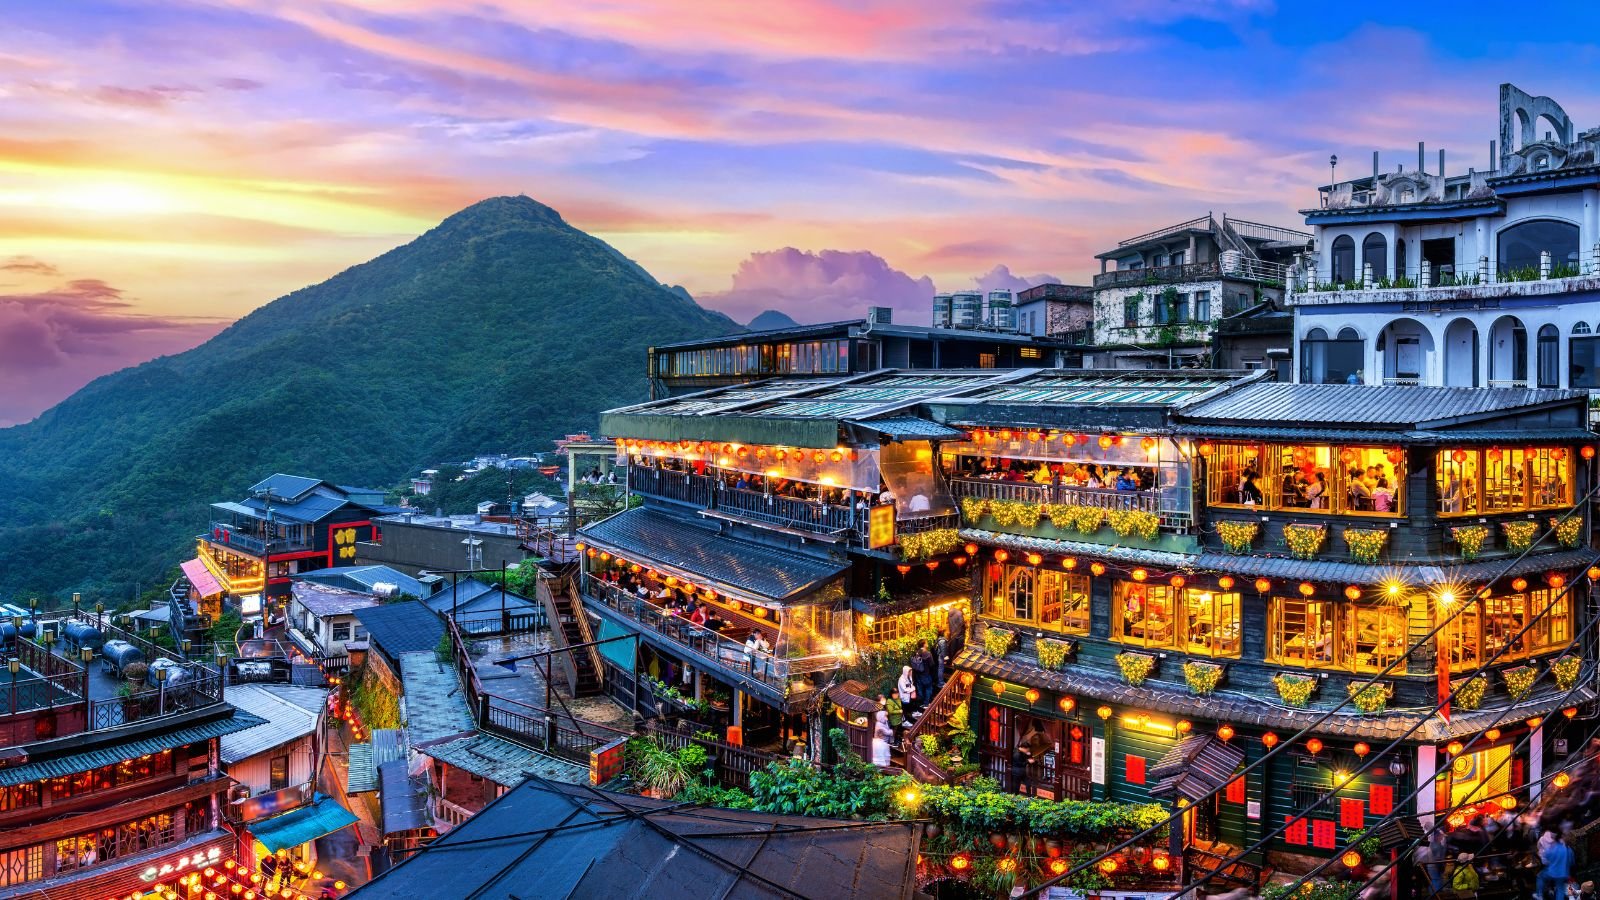 <ul> <li>Score: 8.84</li> </ul> <p>Taipei, the vibrant capital of Taiwan, is one of the first Asian cities to embrace the LGBTQ+ community. It is the first Asian country to legalize <a href="https://china.usc.edu/celebrating-pride-lgbtq-community-china-taiwan#:~:text=In%202019%2C%20Taiwan%20became%20the%20first%20place%20in%20Asia%20to%20legalize%20same%2Dsex%20marriage.%20Public%20attitudes%20have%20also%20become%20more%20accepting%2C%20and%20Taiwan%20has%20a%20thriving%20LGBTQ%2B%20community%20with%20events%20like%20the%20Taiwan%20Pride%20parade." rel="noopener">same-sex marriage in 2019</a>. This commitment to equality translates into a thriving LGBTQ+ scene, bustling with diverse venues like bars, clubs, cafes, and boutiques. The acceptance is mainly concentrated in Ximen and Zhongshan areas. The historic Red House further serves as a hub for LGBTQ+-friendly establishments. Beyond specific locations, the “<a href="https://taiwan-scene.com/2019/10/05/ultimate-taipei-lgbt-map/" rel="noopener">Ultimate Taipei LGBT Map</a>” offers a colorful guide to queer hotspots. It includes the trendy Abrazo Taipei and the iconic Cafe Dalida. Taipei’s annual Pride celebration, <a href="https://www.reuters.com/world/asia-pacific/crowds-throng-taipei-taiwan-celebrates-east-asias-largest-pride-march-2023-10-28/#:~:text=TAIPEI%2C%20Oct%2028%20(Reuters),government%20leader%20ever%20to%20attend." rel="noopener">one of Asia’s biggest</a>, further solidifies its welcoming atmosphere, attracting thousands to celebrate love, diversity, and inclusivity.</p>